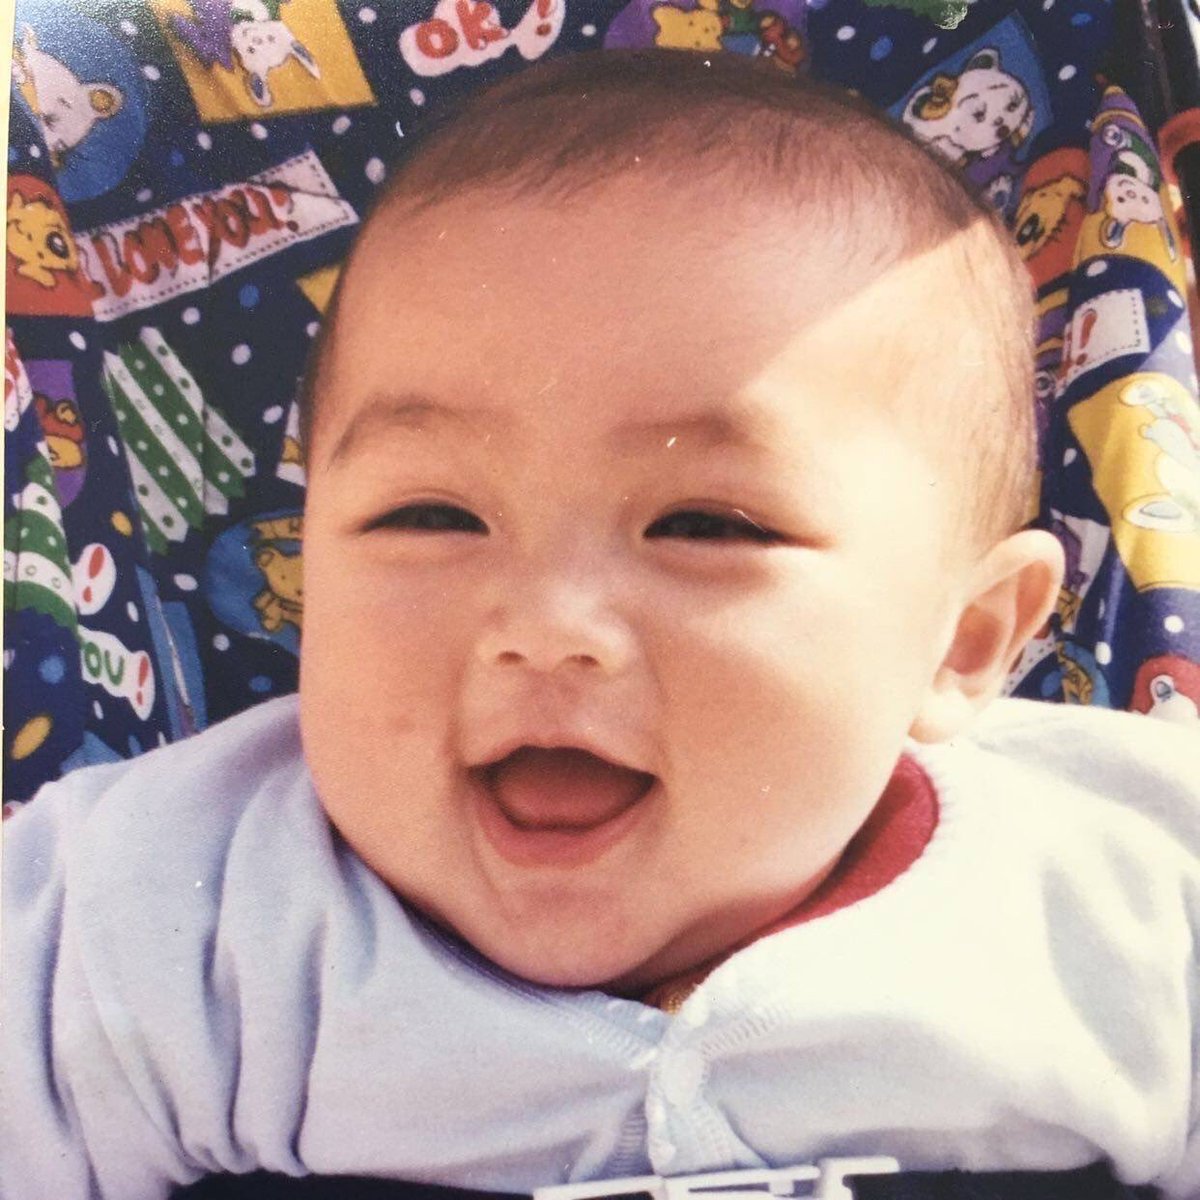 On the 8th of August, year 1999, a cute bouncing baby boy named Xiaojun was born. He had the most fluffy cheeks similar to mochi balls and at such a young age, his eyes already tells a lot. He is a very smiley baby.  #HAPPYXIAOJUNDAY #肖俊0808生日快乐